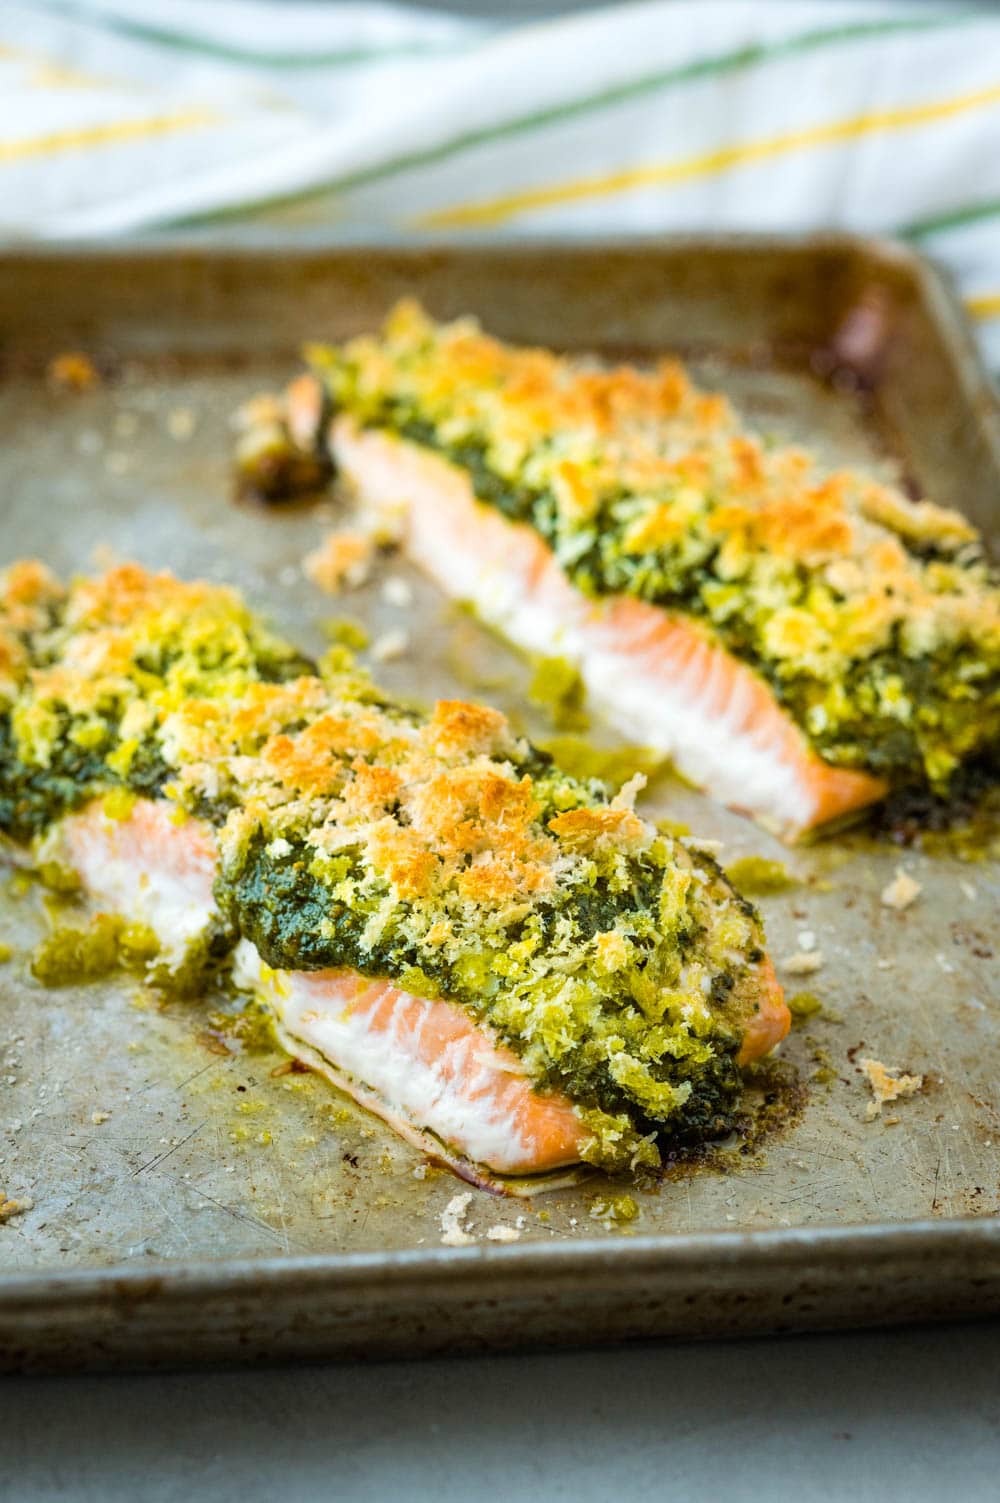 The golden crust and pesto sauce on the baked salmon fillets.